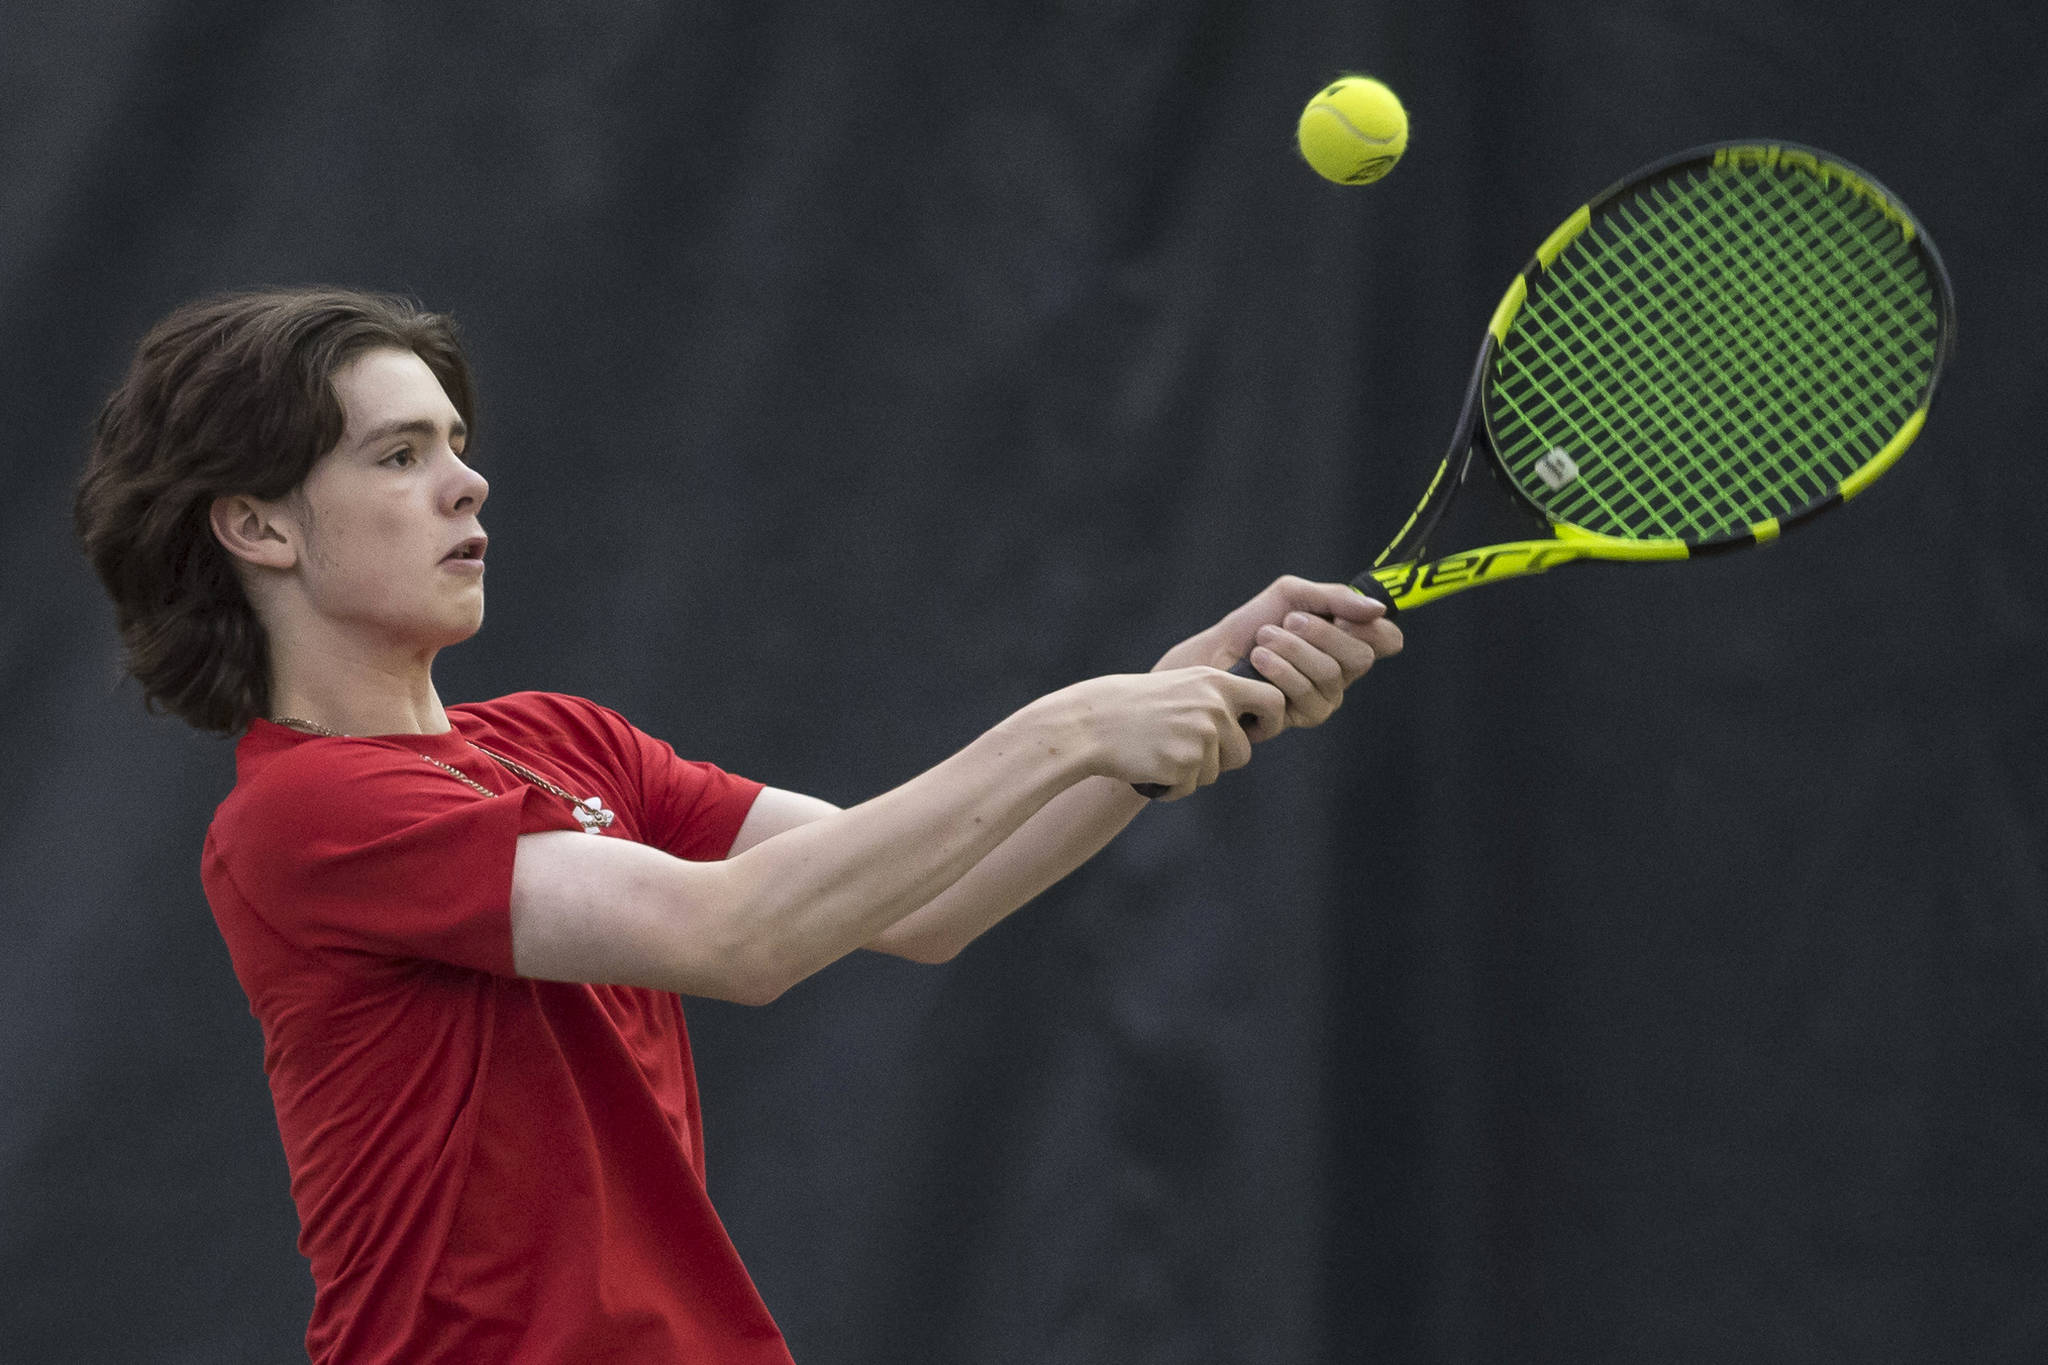 William Smoker, a junior at Juneau-Douglas High School, returns a backhand during the Regional Tennis Championships at JRC/The Alaska Club on Sunday, Sept. 23, 2018. Smoker placed first in singles, doubles and mixed doubles. (Michael Penn | Juneau Empire)